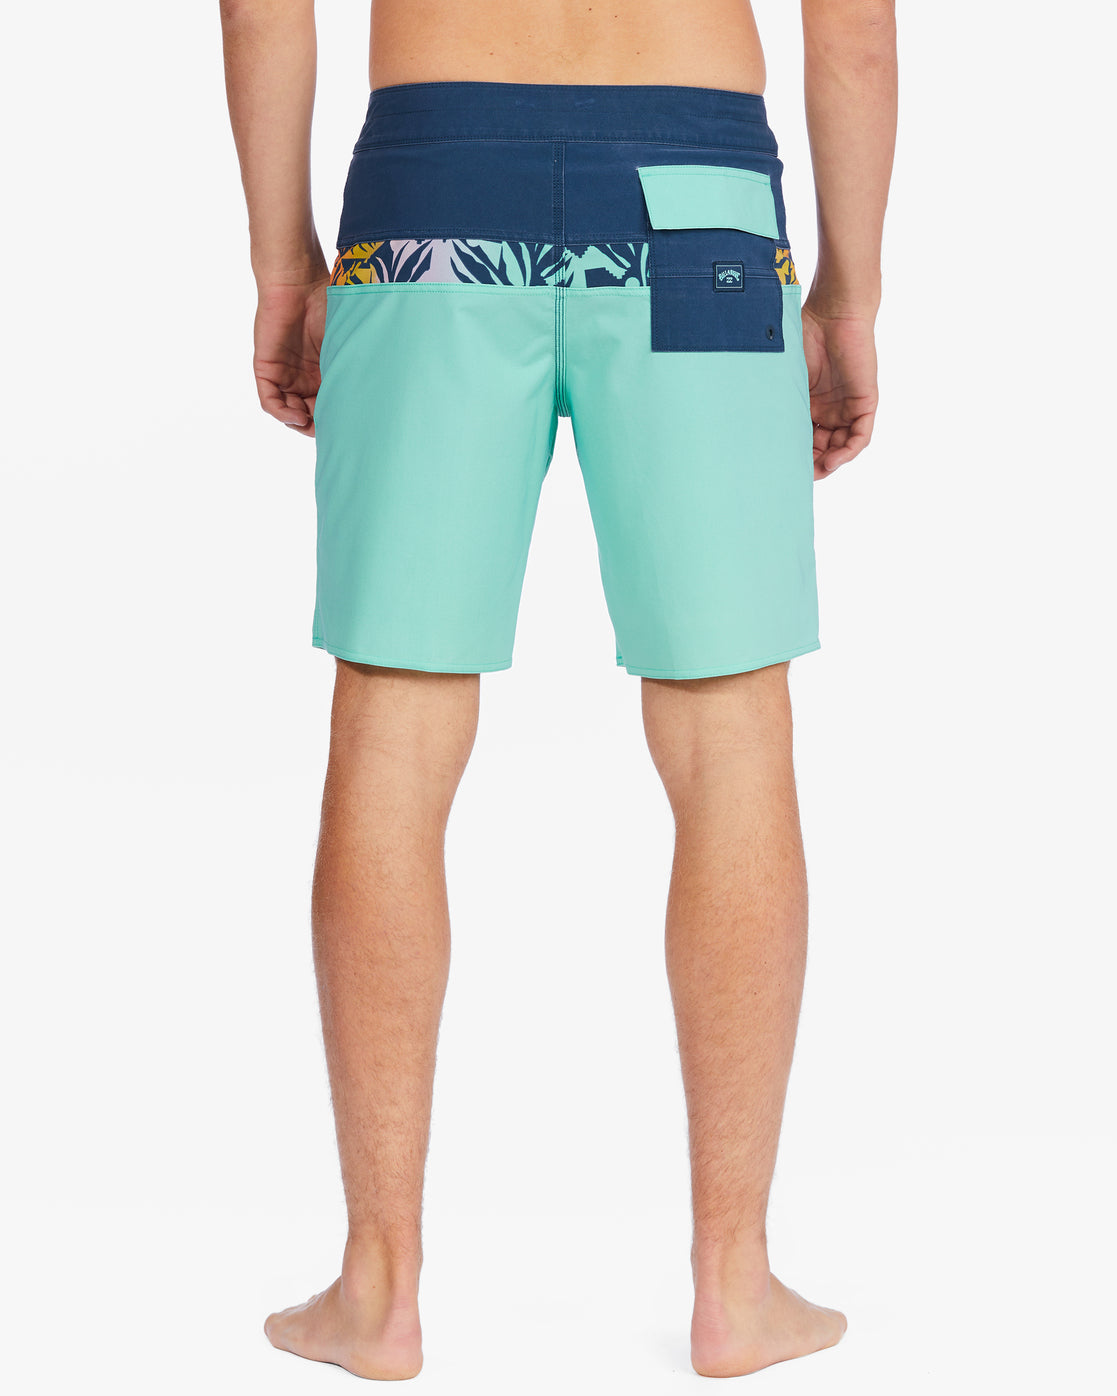 MENS MOMENTUM BOARDSHORTS - ABYBS00327